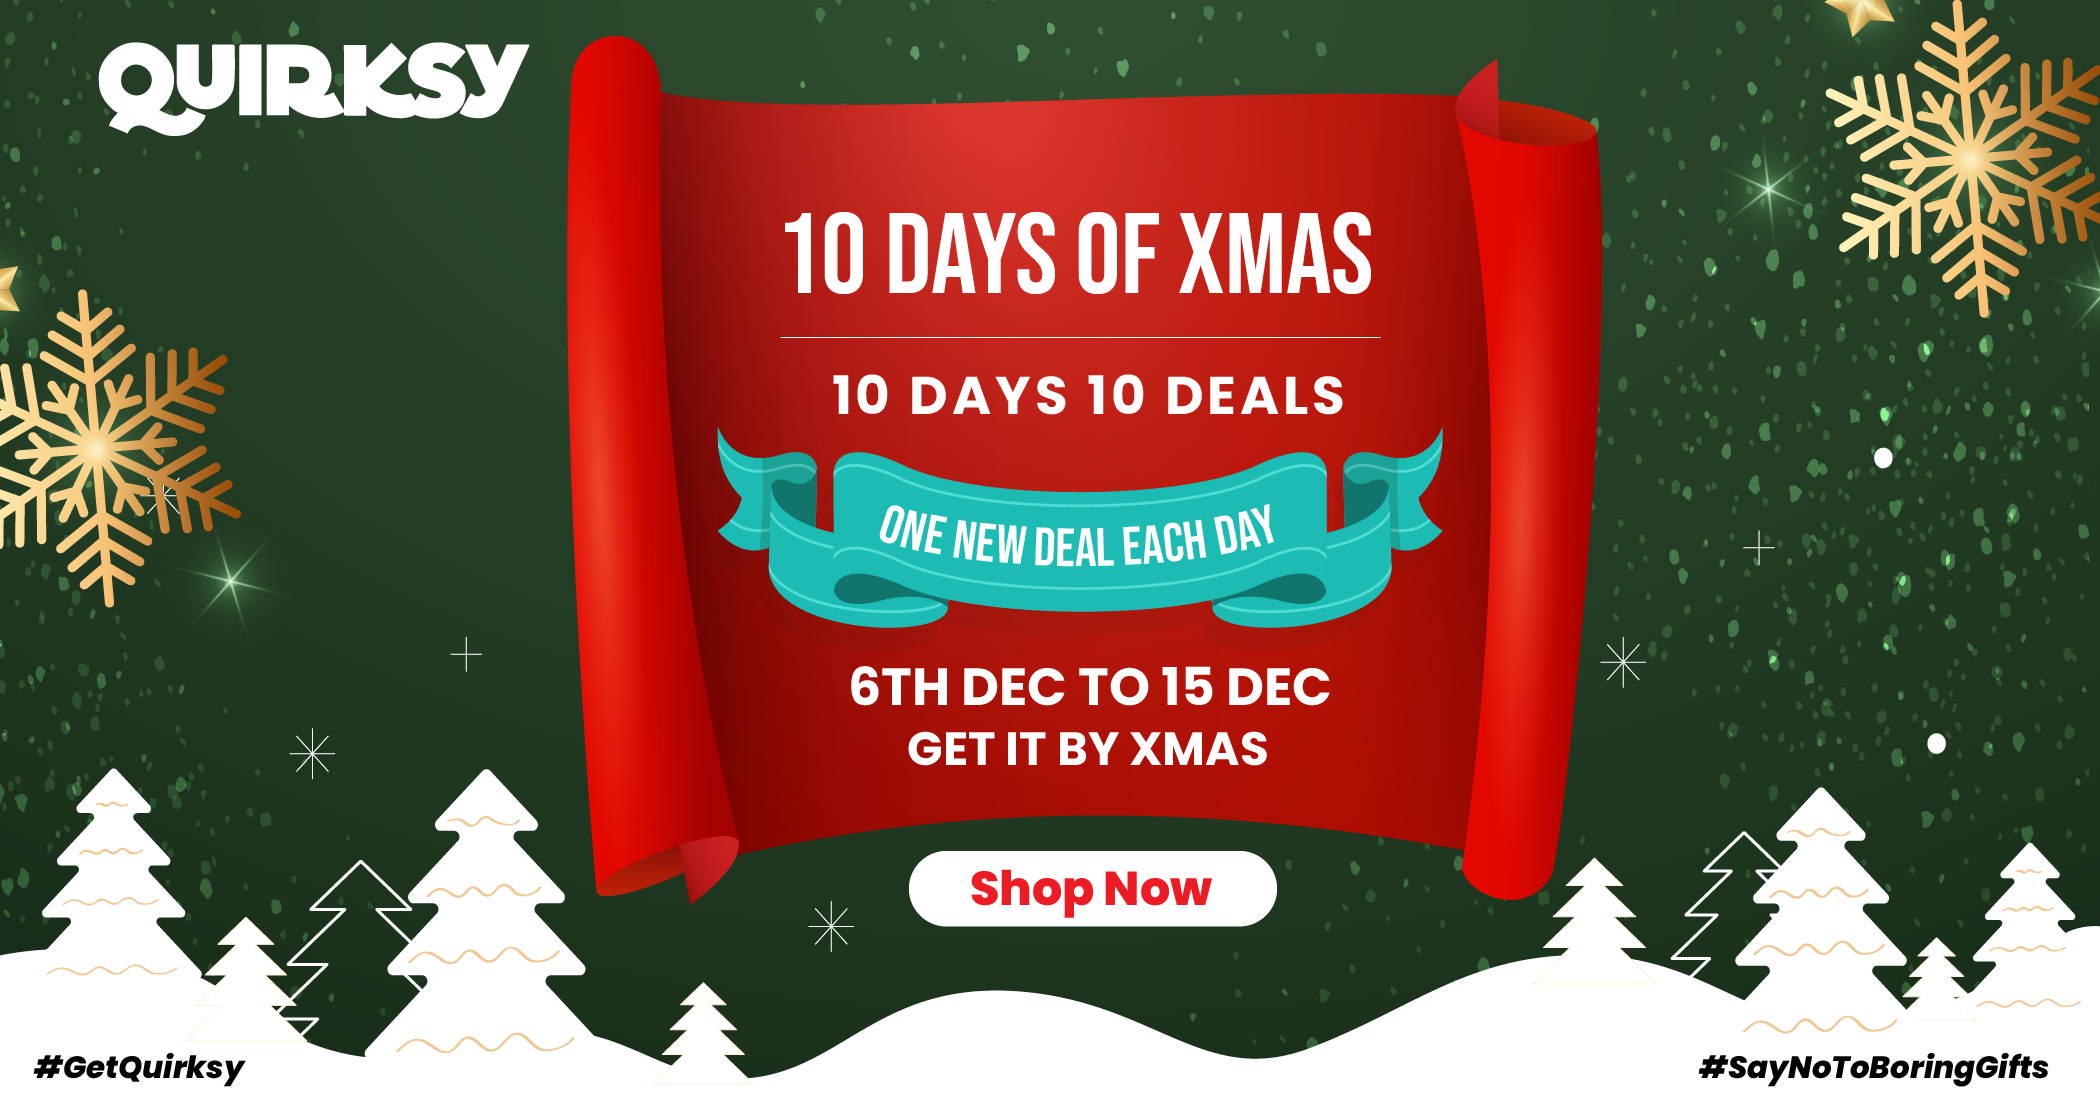 Days of Xmas on Quirksy - Amazing gift ideas and deals this christmas